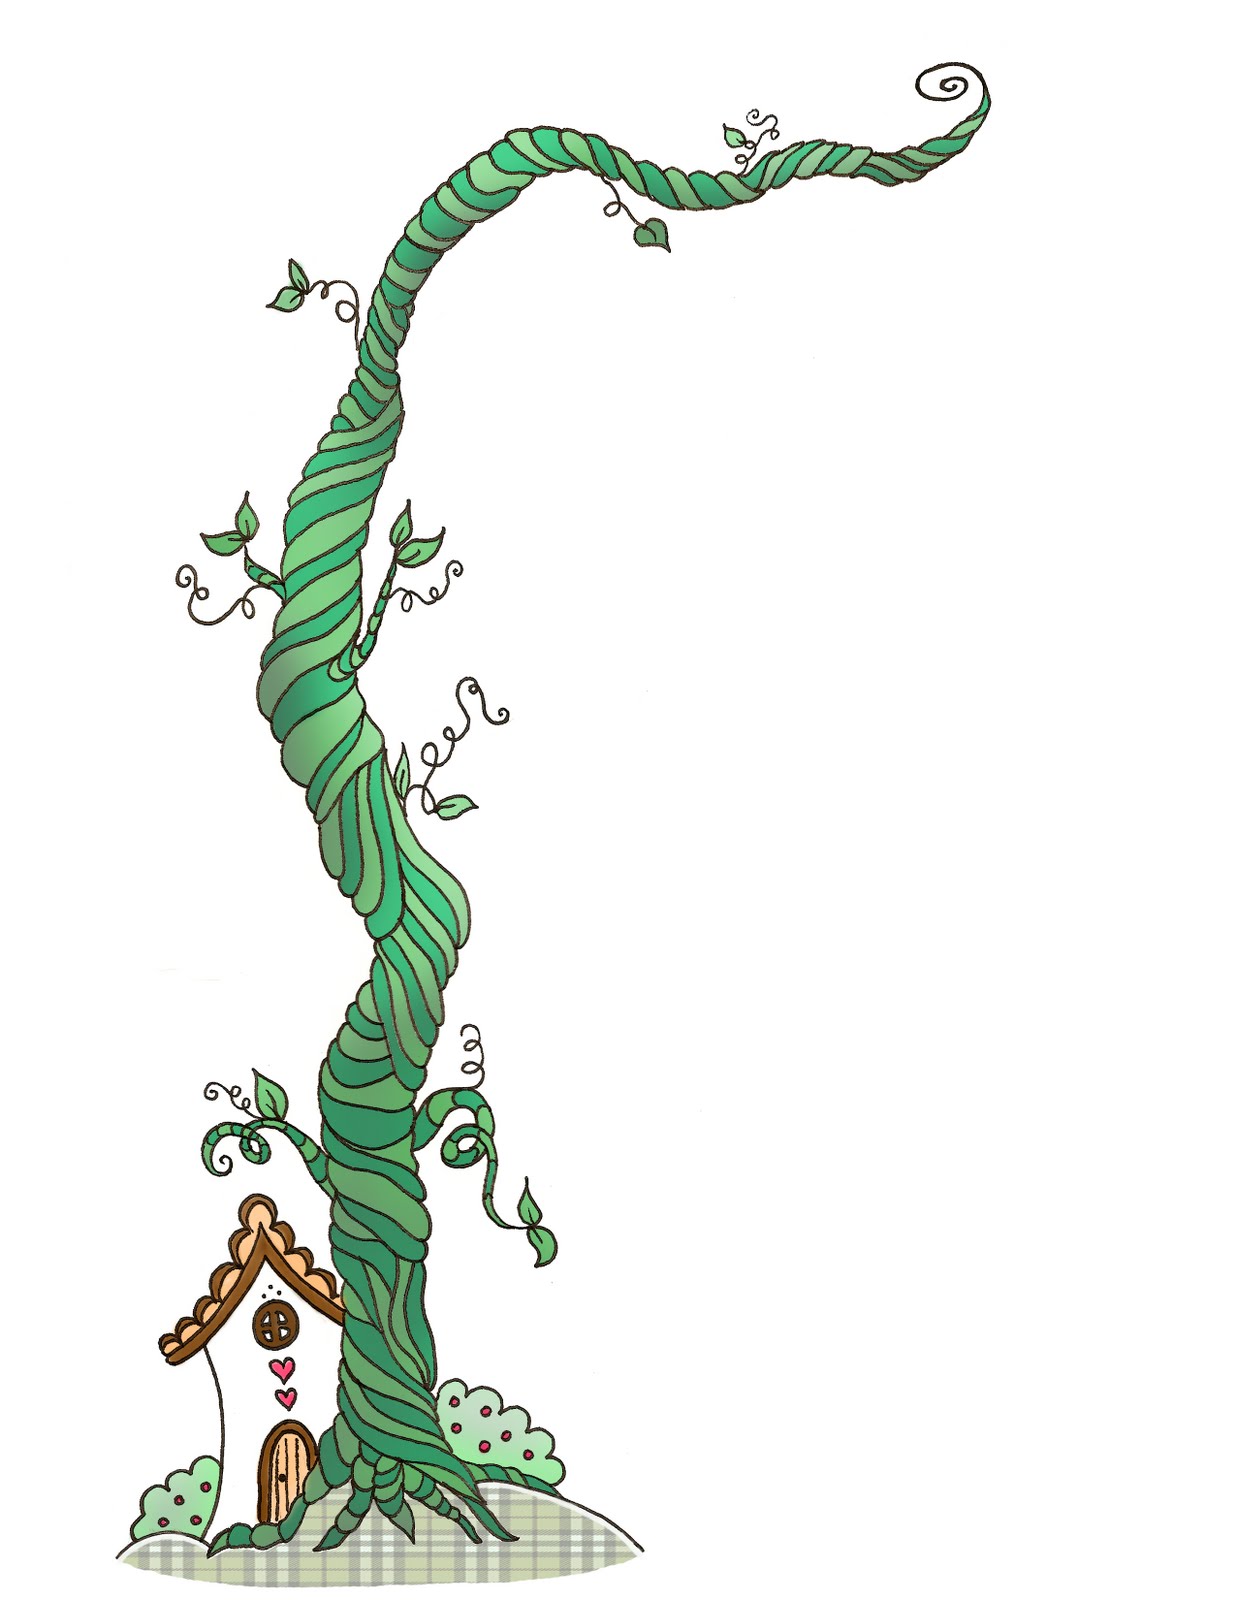 Jack From Jack And The Beanstalk   Clipart Best